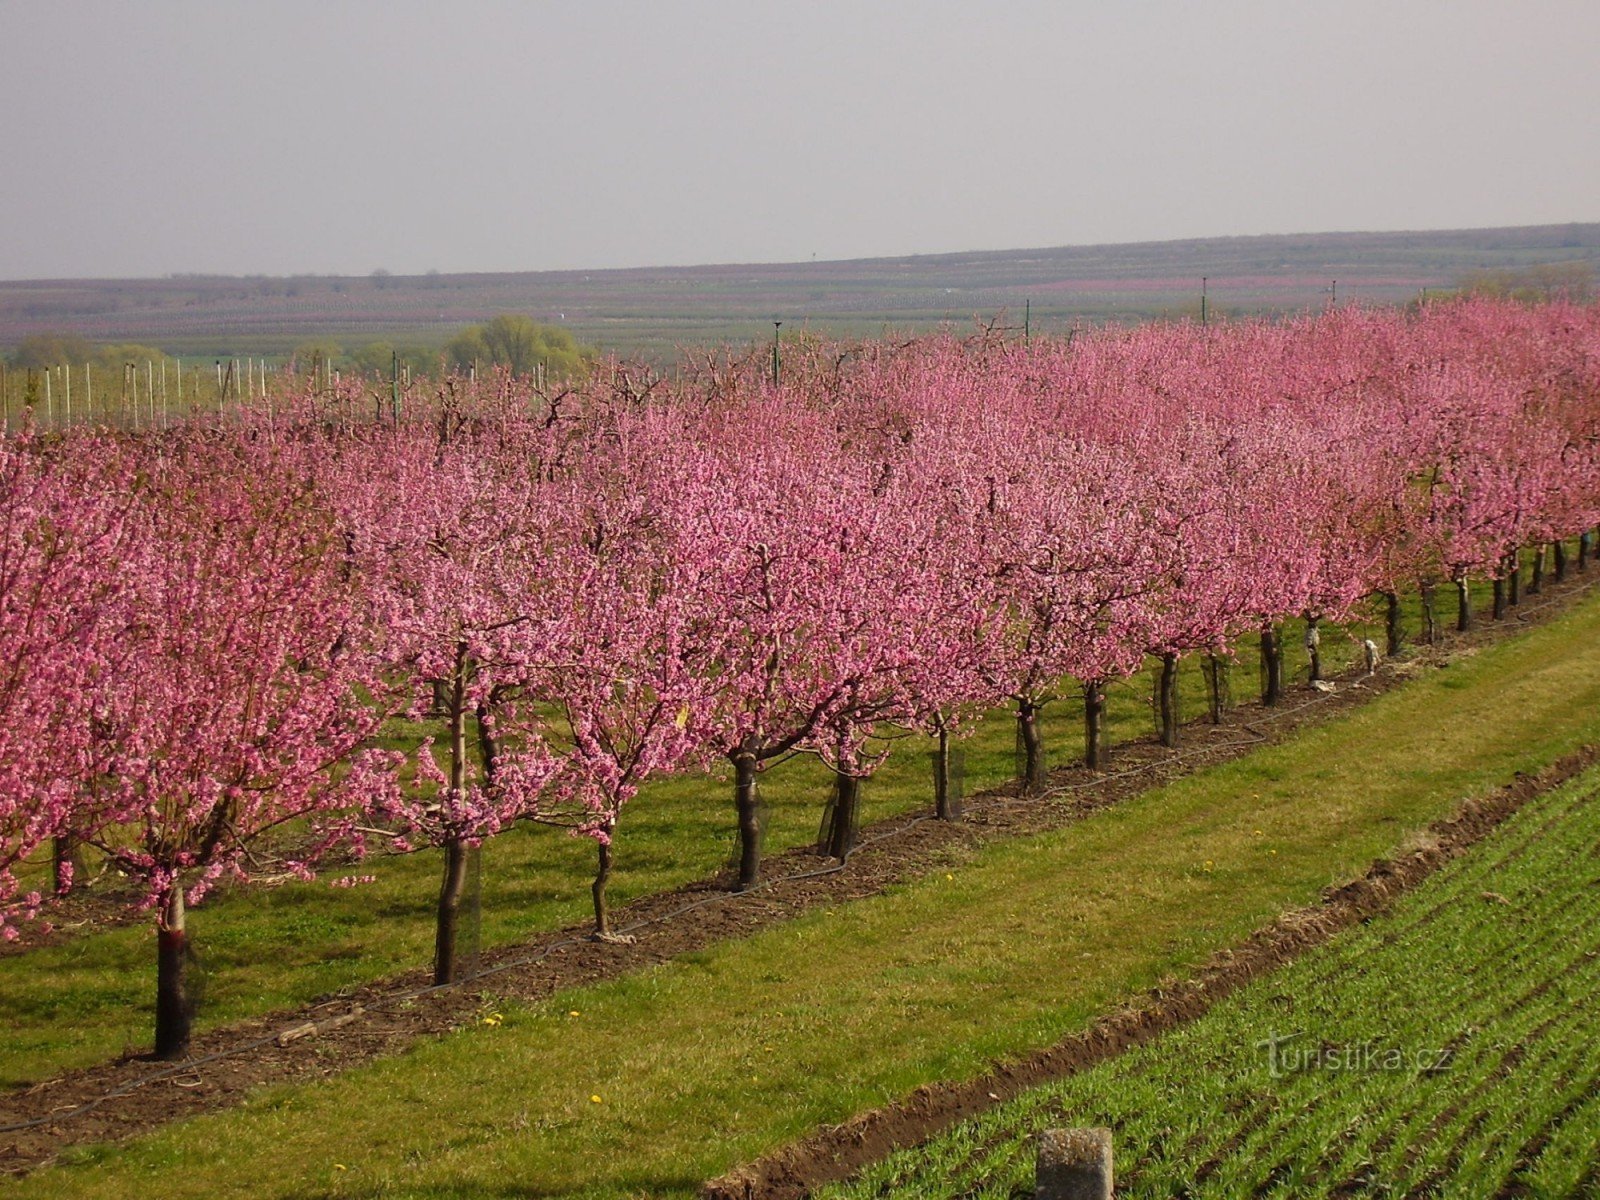 Peach orchard in bloom 13/4/2008